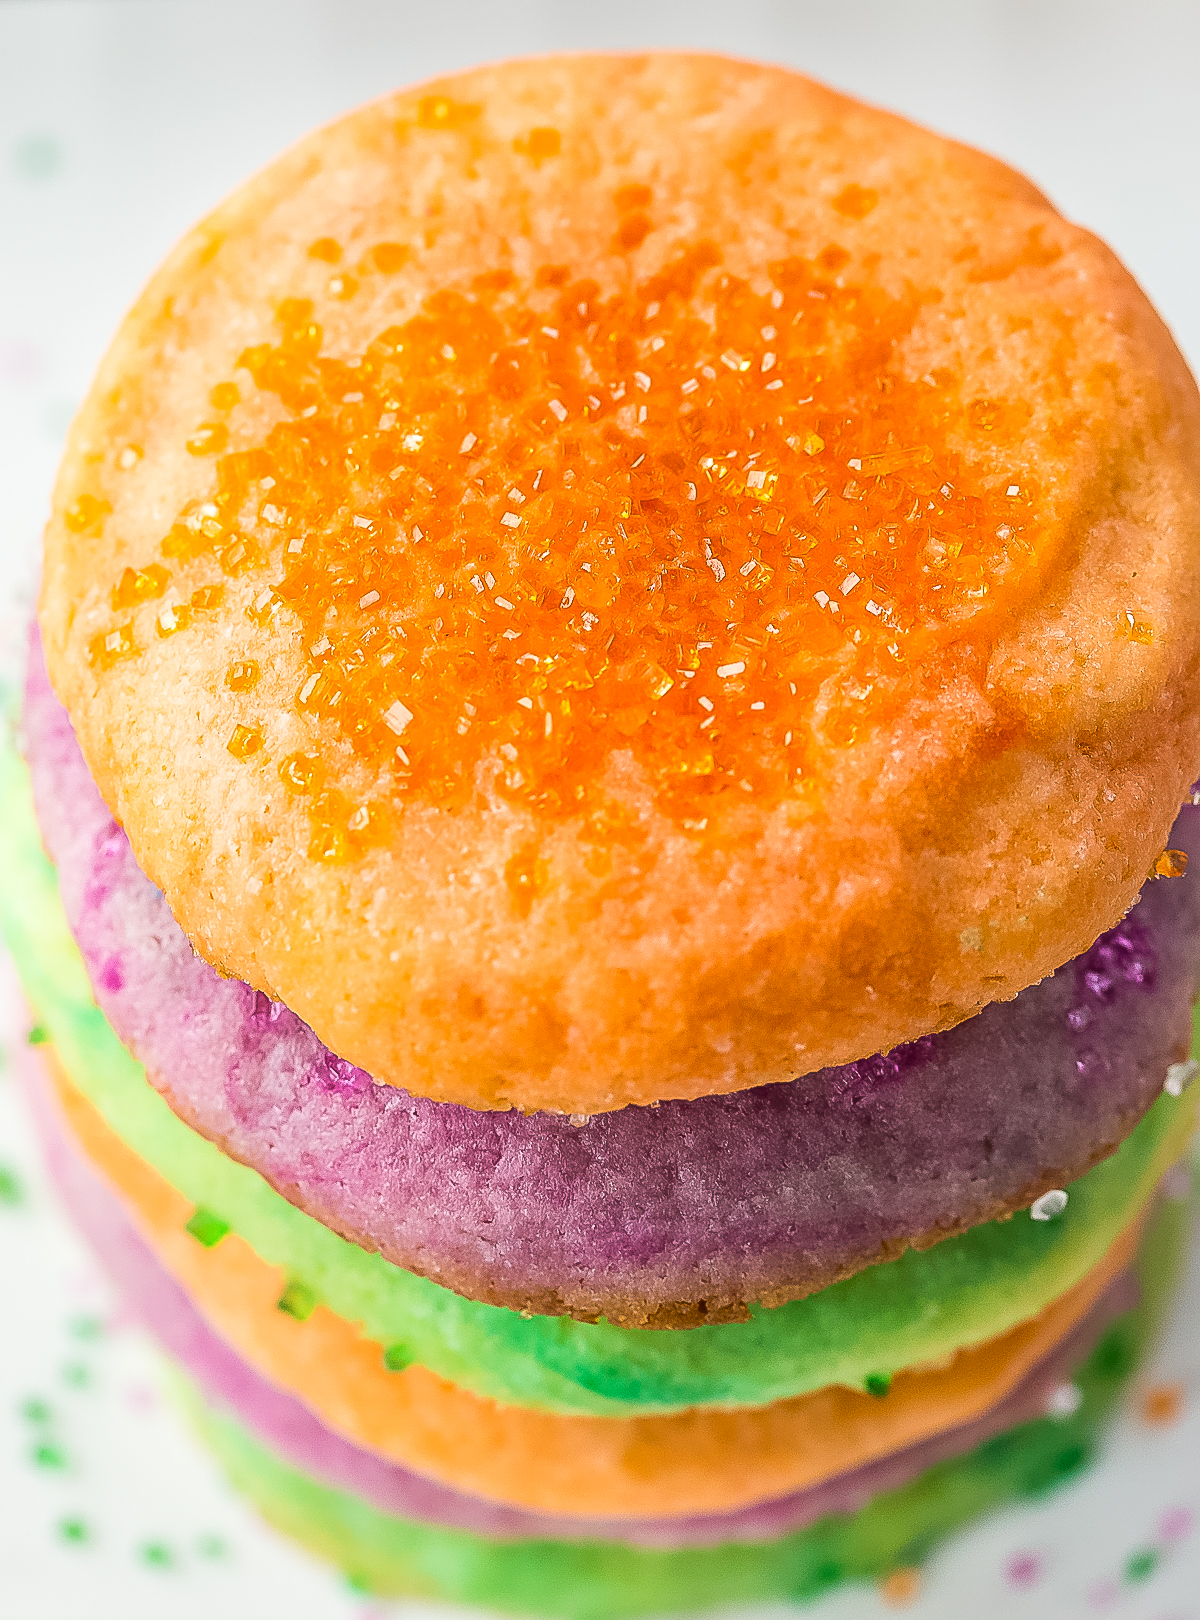 This recipe for Jello Cookies is a twist on a classic sugar cookie. These vibrant cookies are a fun retro treat that kids are sure to love!